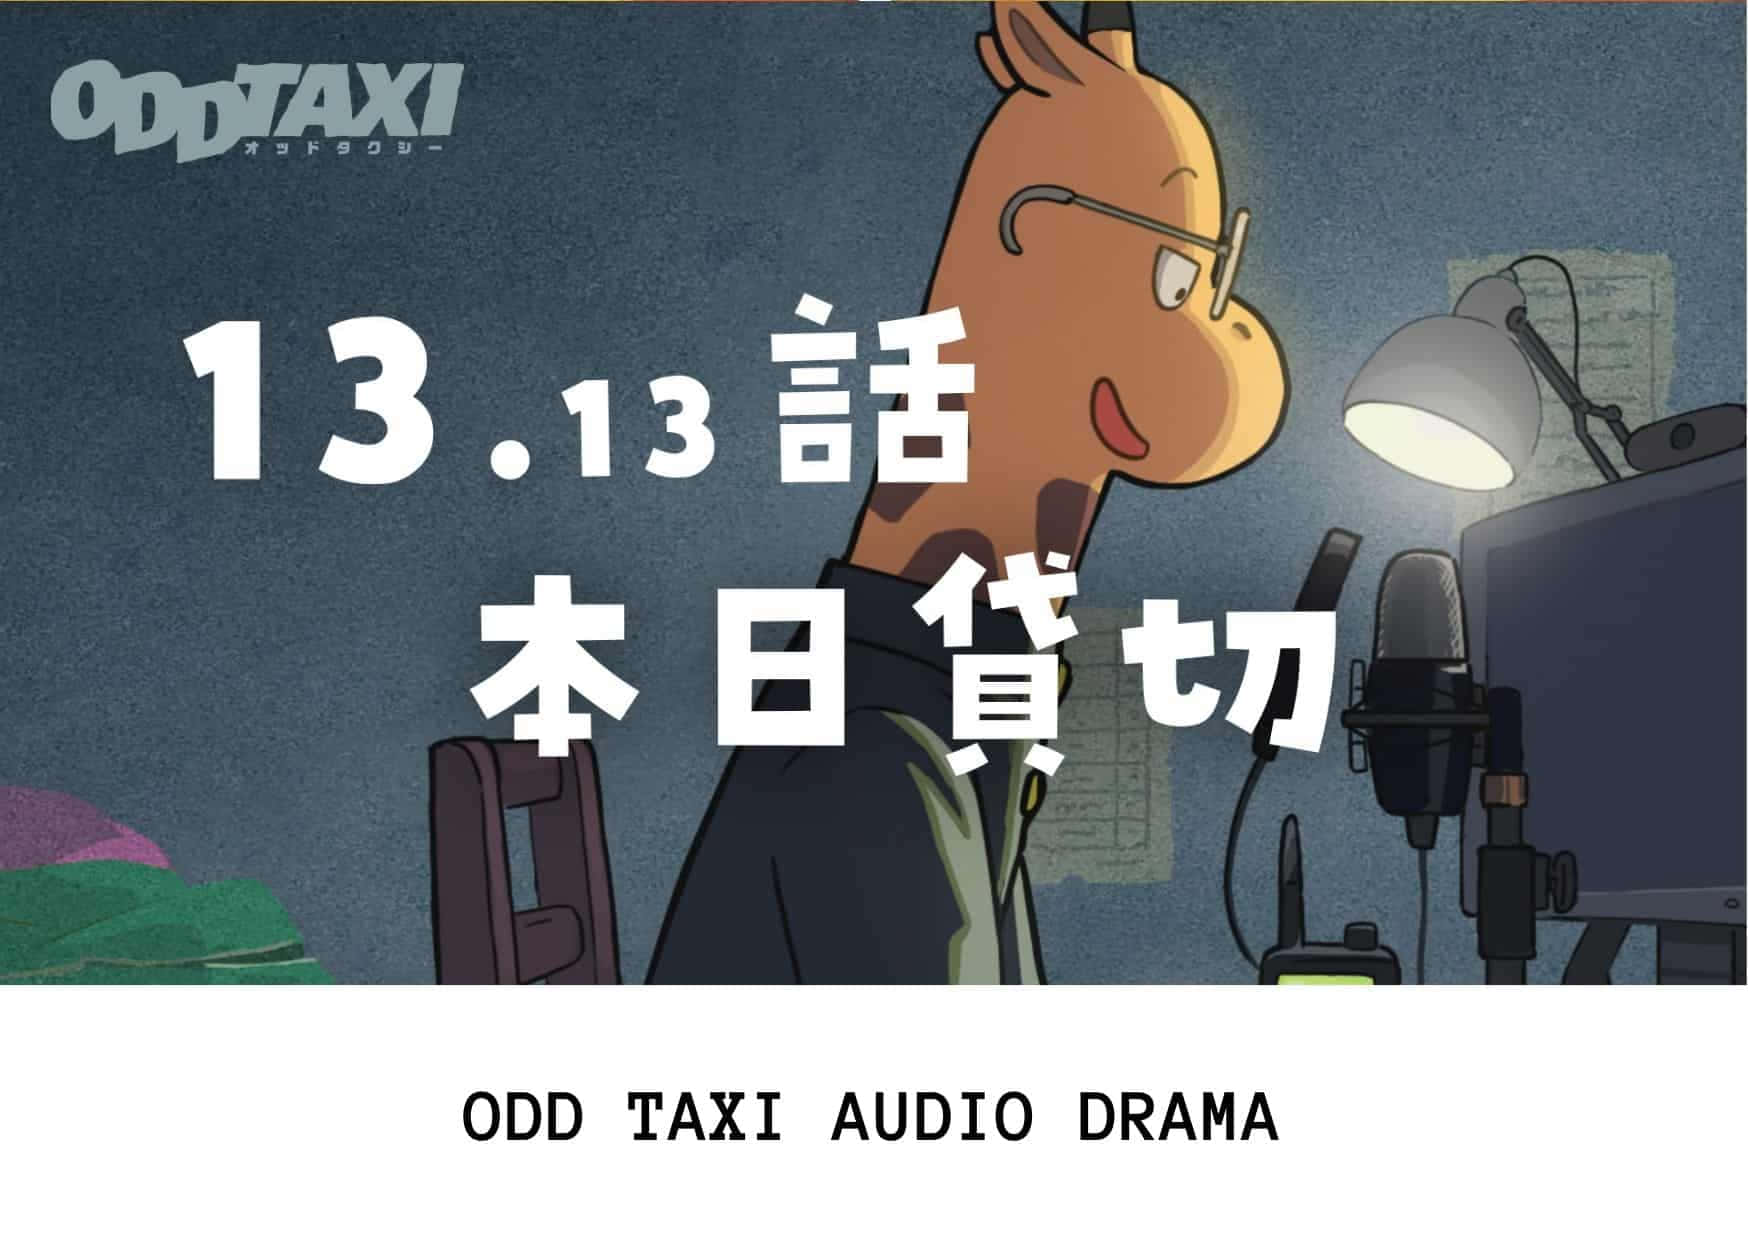 "Ride in Style with Odd Taxi"